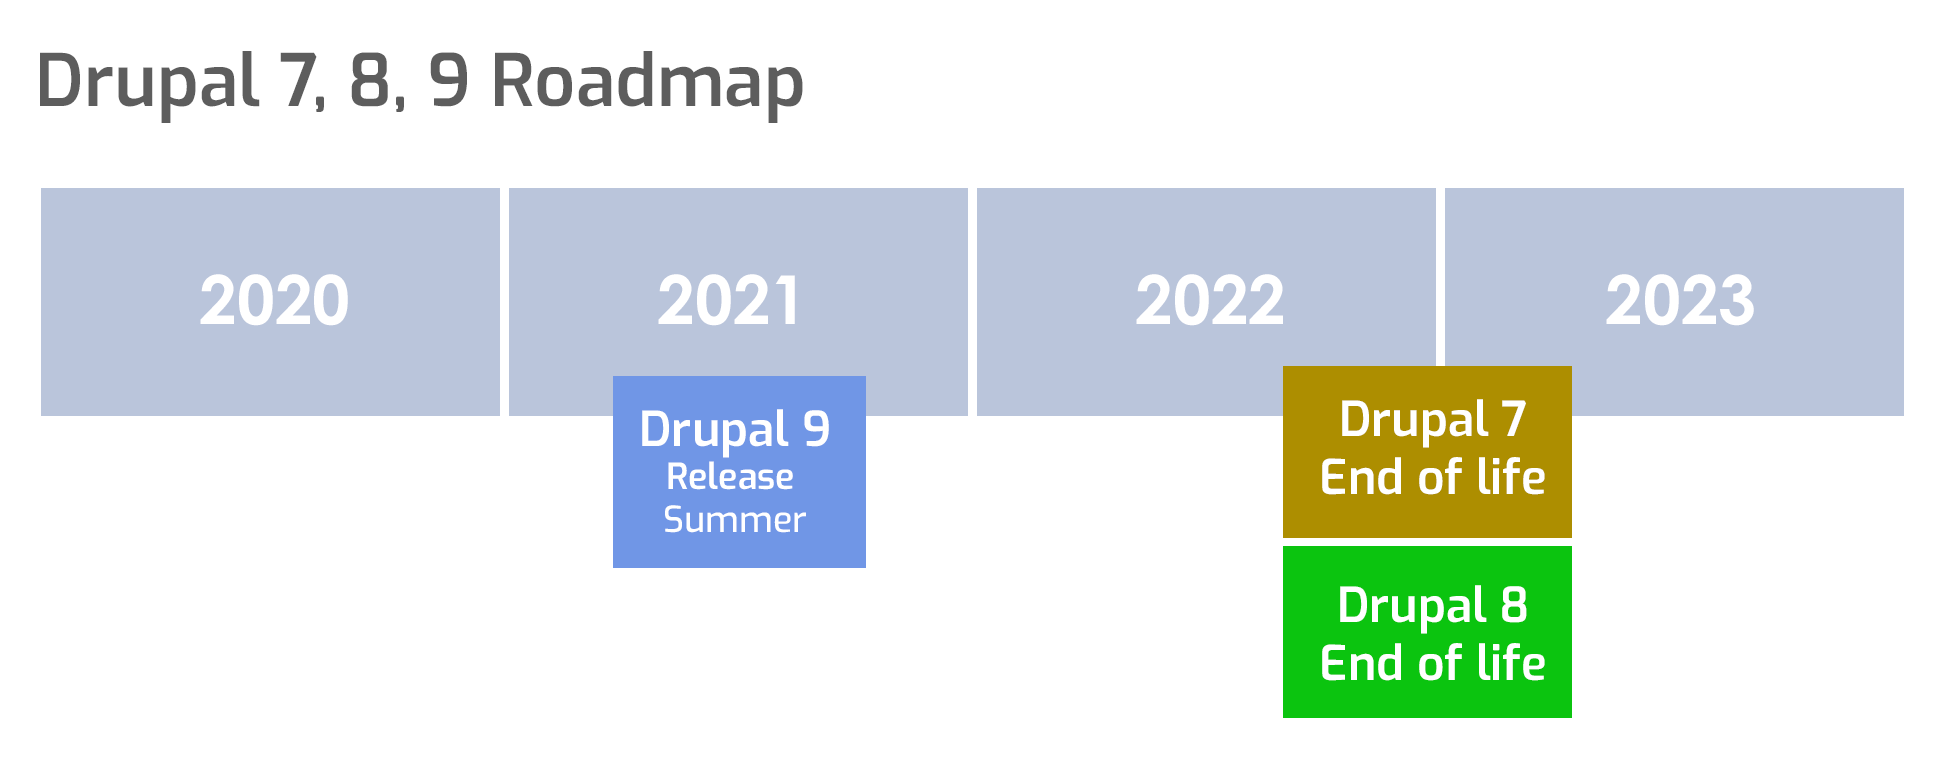 What is the schedule for Drupal 7's end of life?